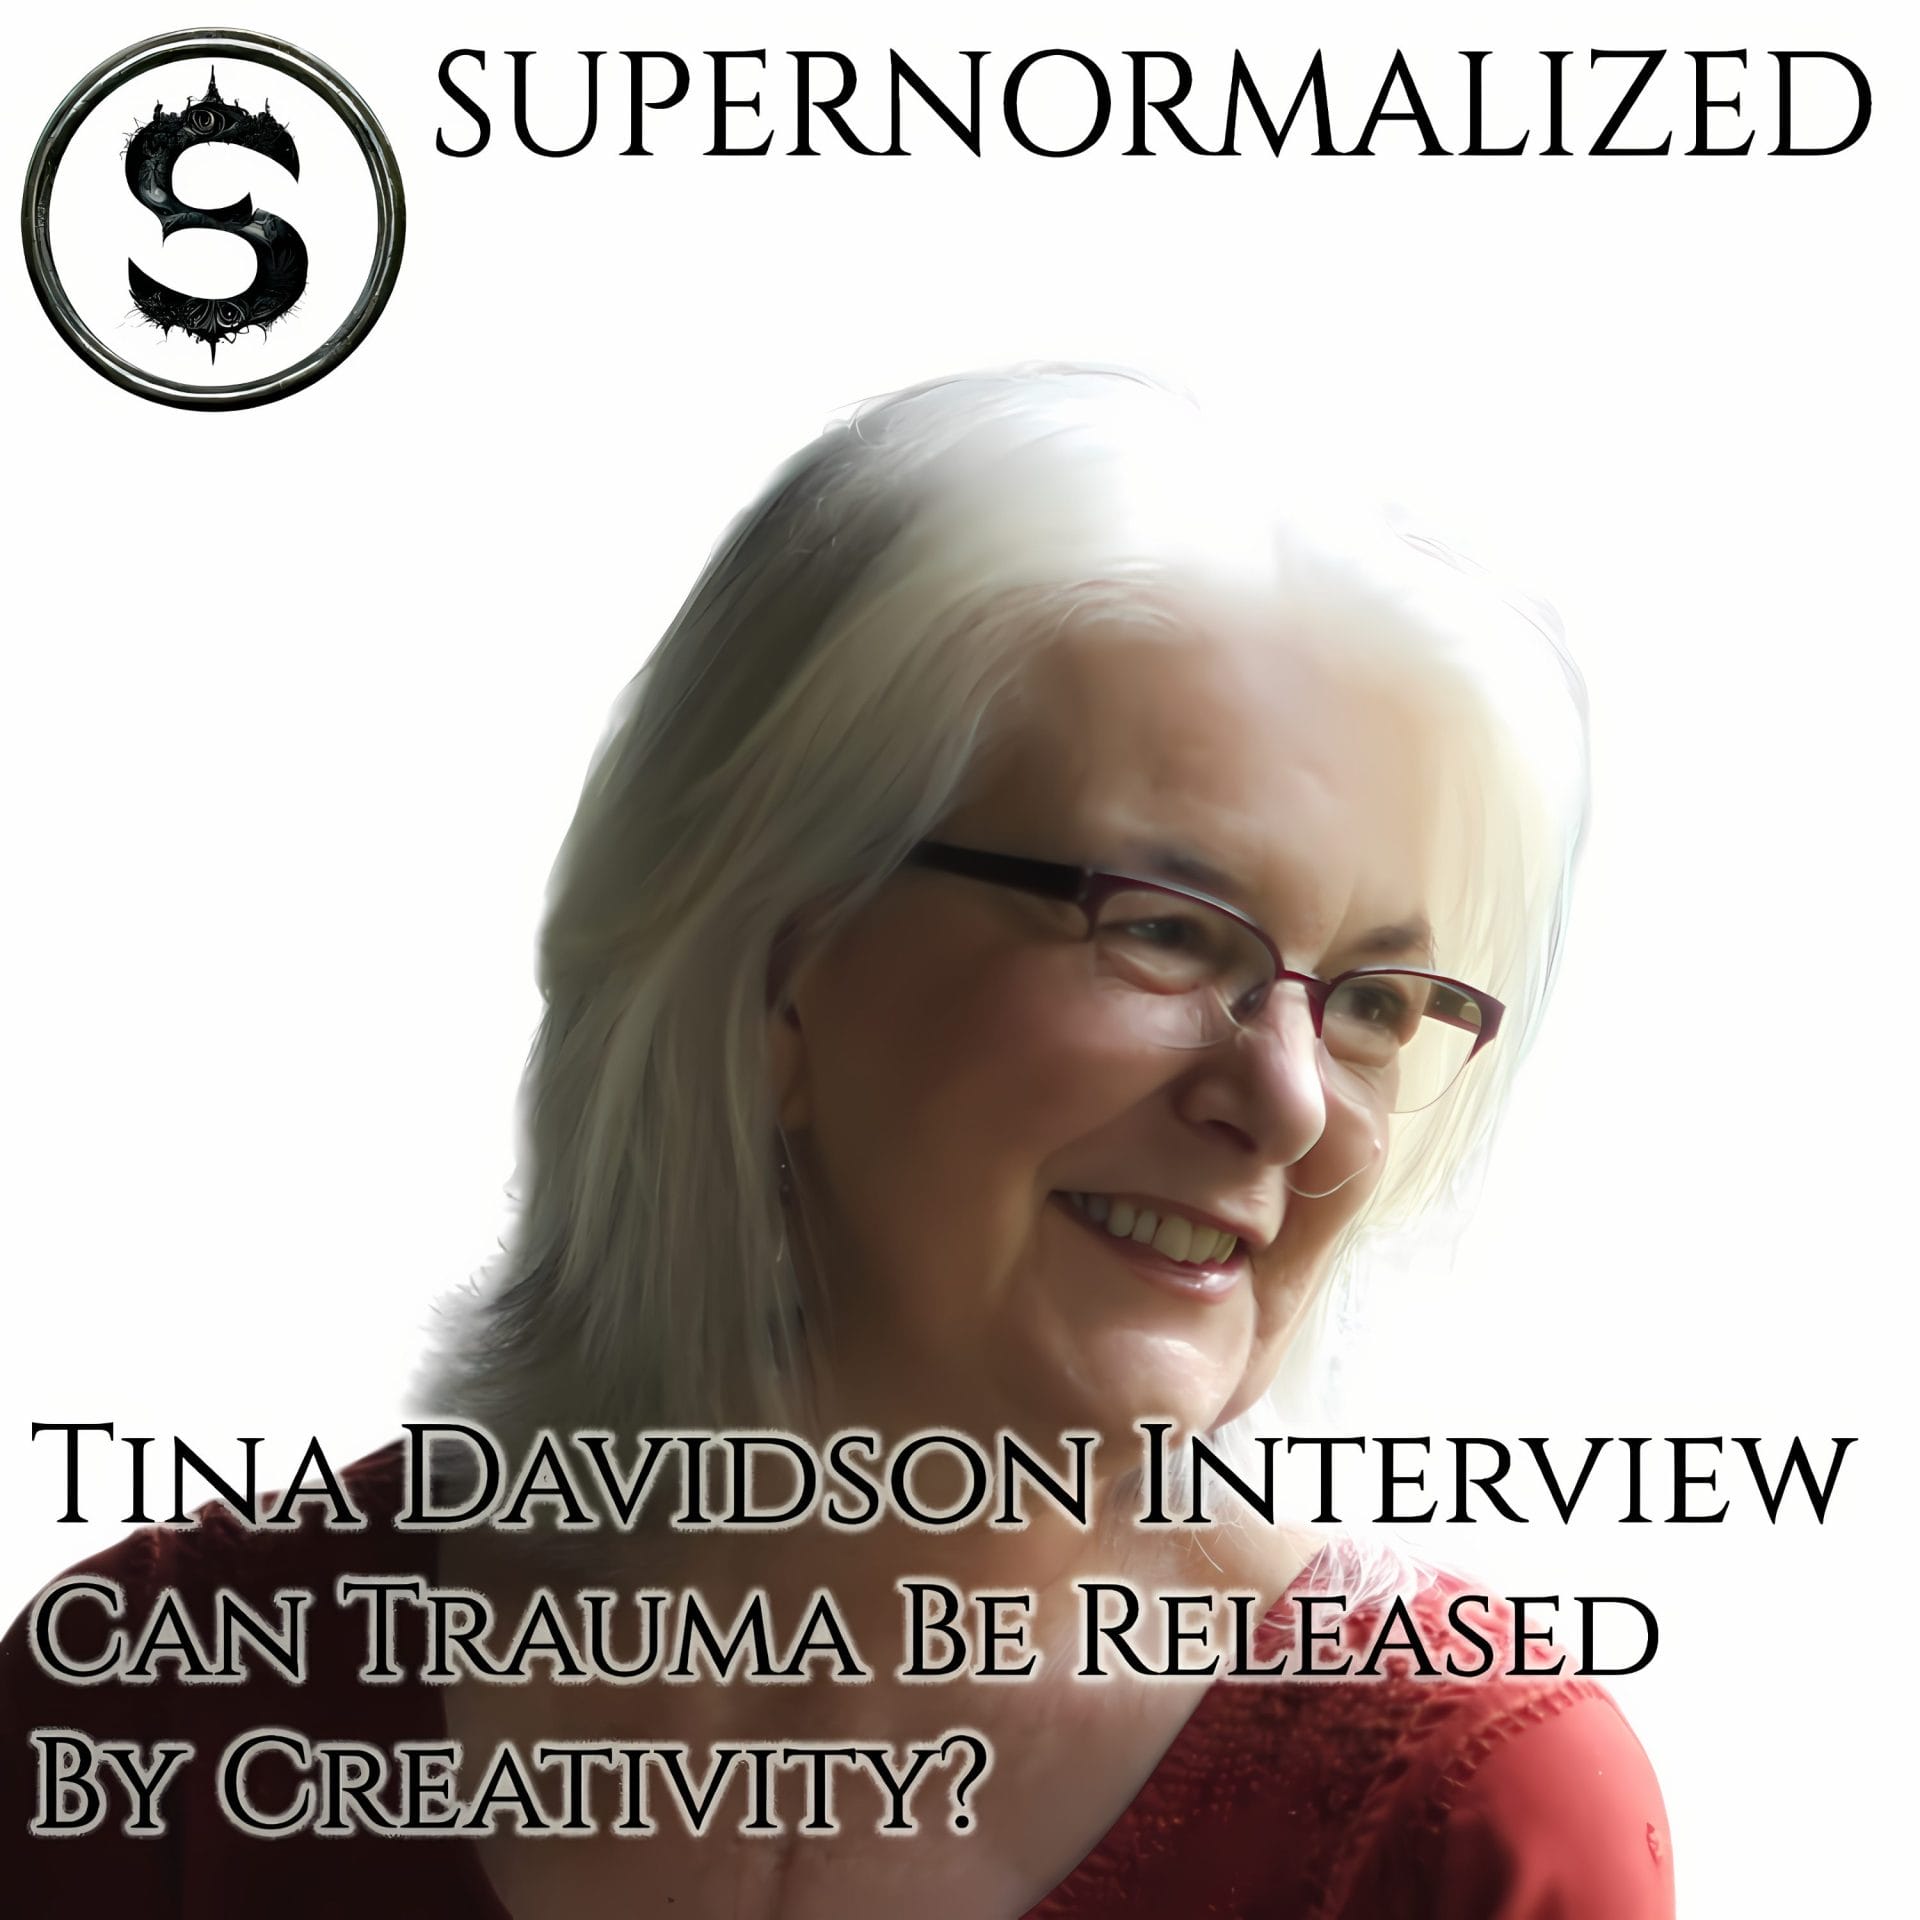 Tina Davidson Interview Can Trauma Be Released By Creativity?